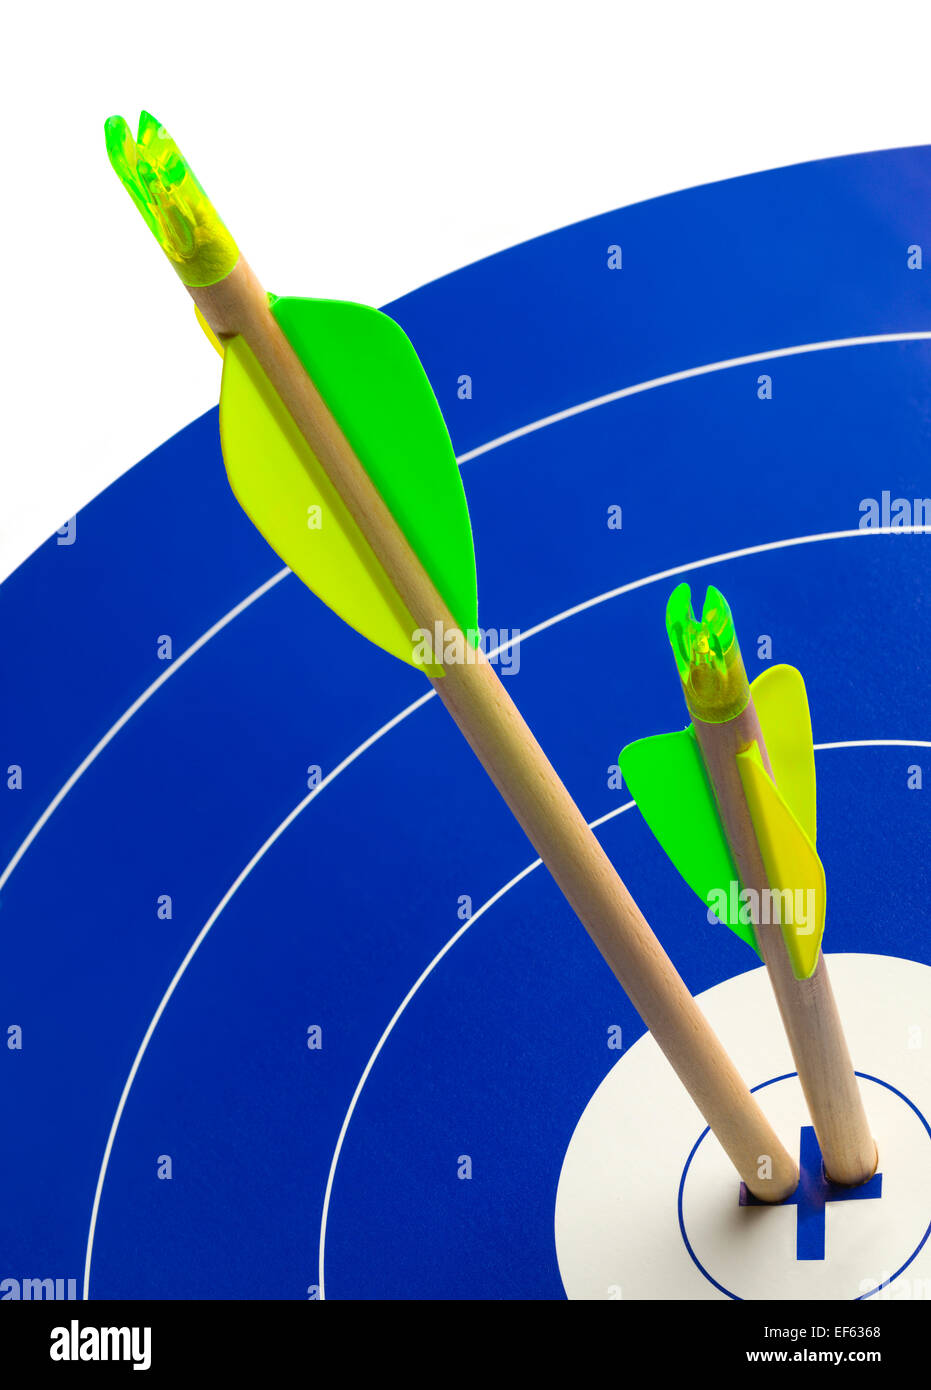 Two Wood Arrows in Center of Blue and White Target. Stock Photo